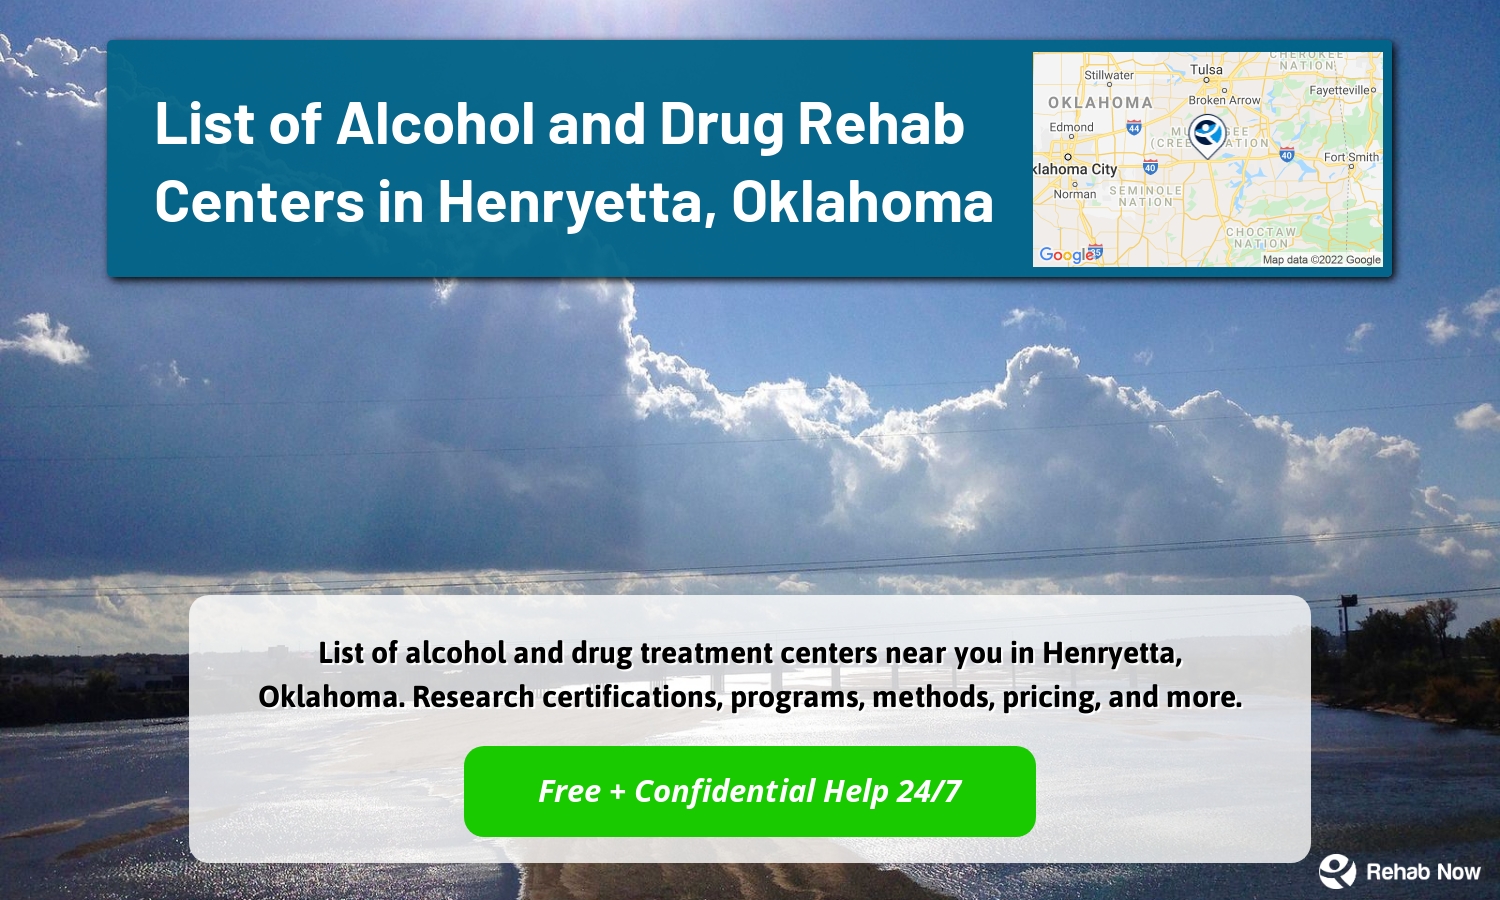 List of alcohol and drug treatment centers near you in Henryetta, Oklahoma. Research certifications, programs, methods, pricing, and more.